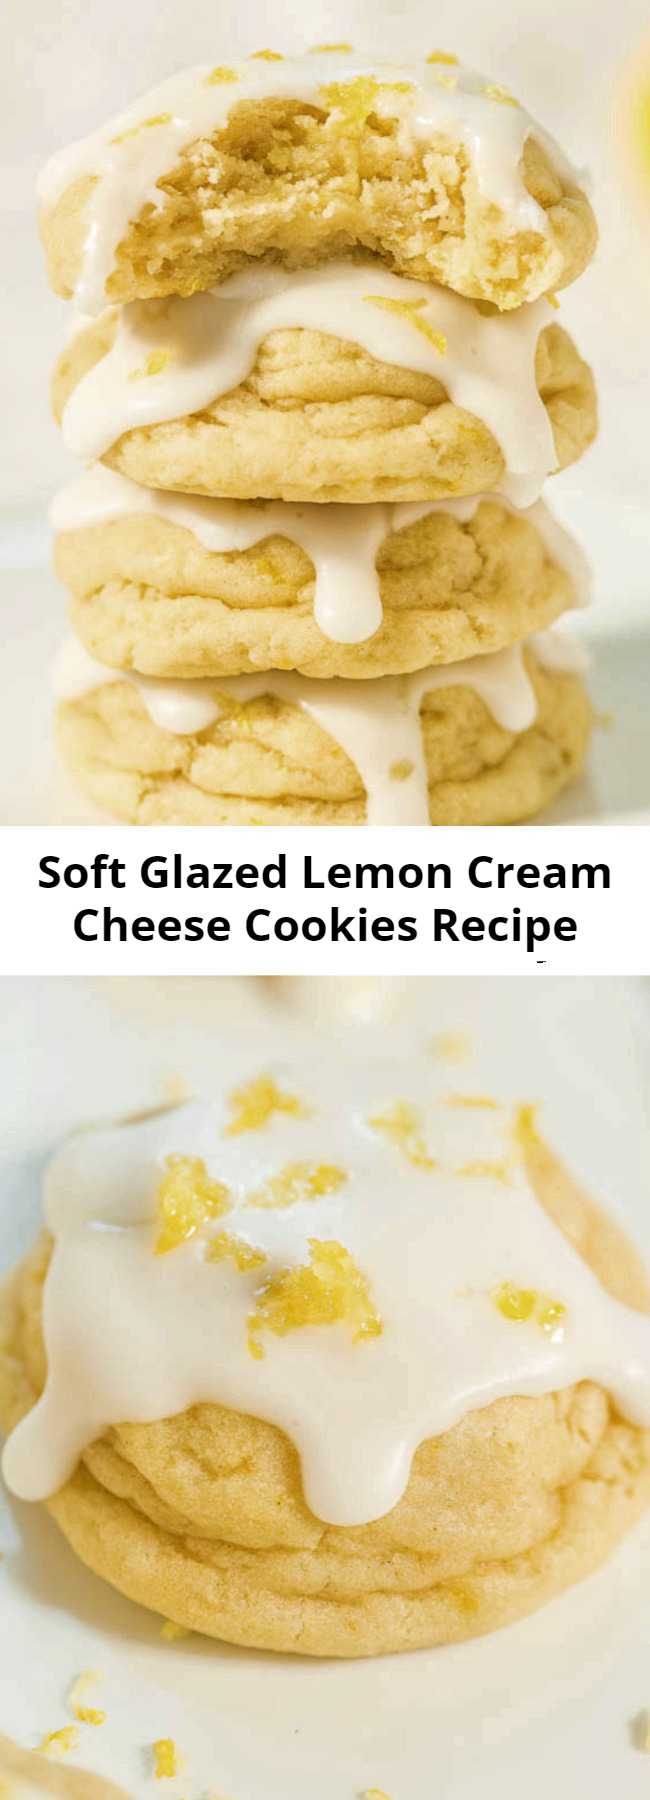 Soft Glazed Lemon Cream Cheese Cookies Recipe - Big, bold lemon flavor packed into super soft lemon cream cheese cookies!! Tangy-sweet perfection! Lemon lovers are going to adore these easy cookies!!